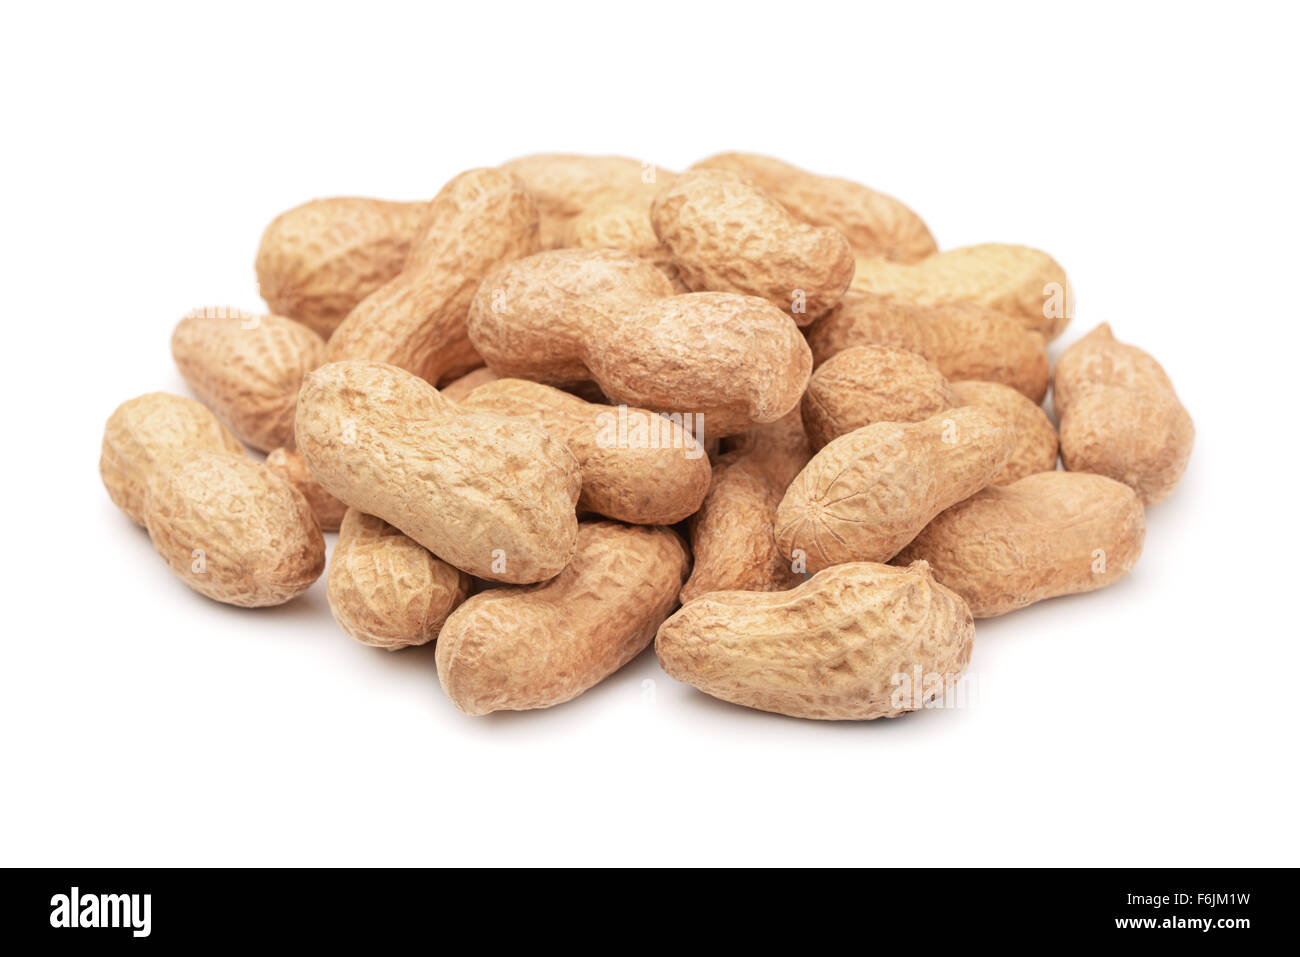 Pile fo shelled peanuts isolated on white Stock Photo